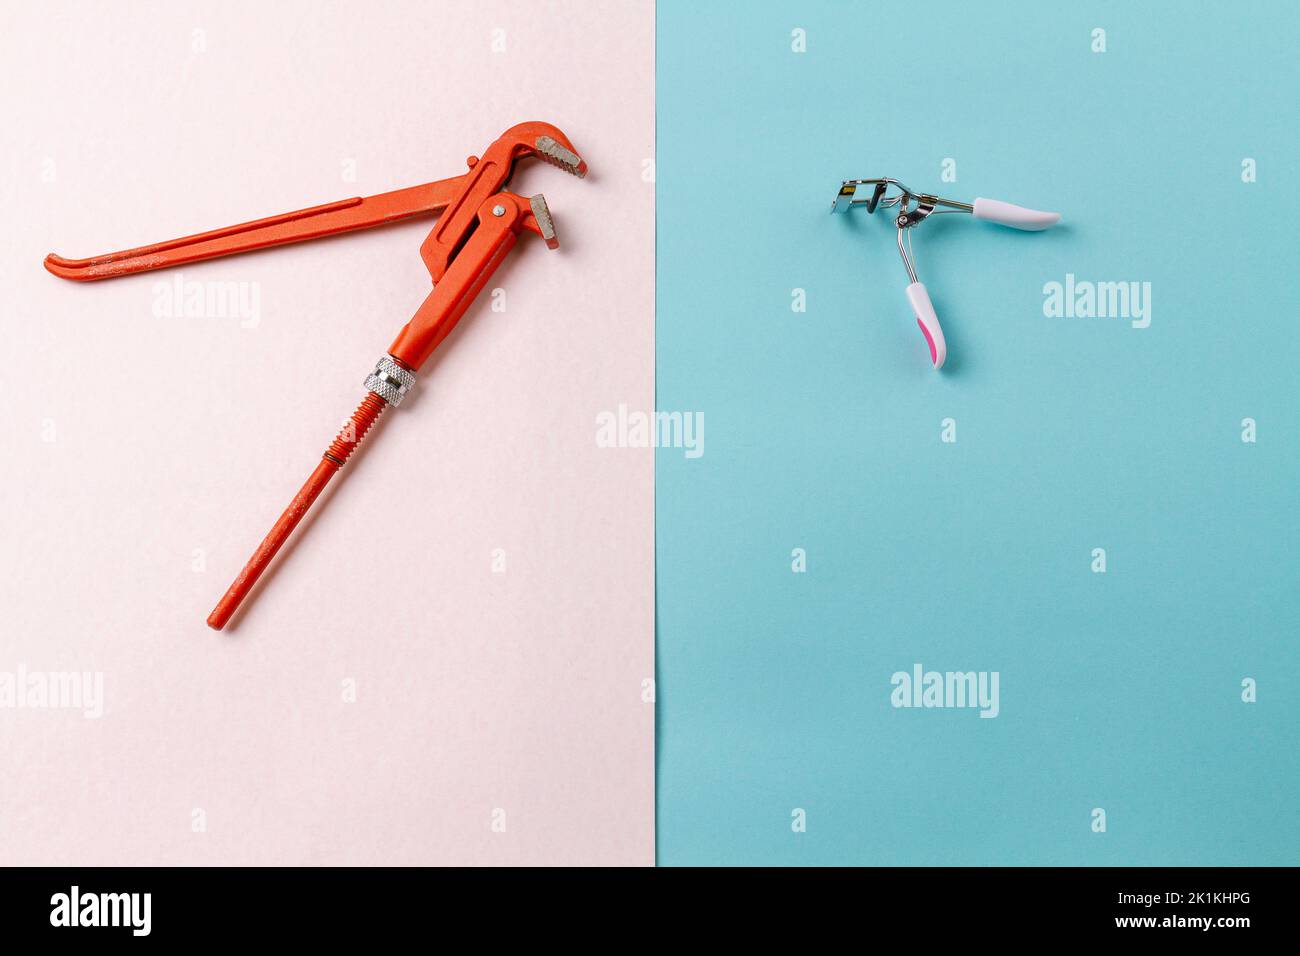 Top view adjustable wrench and eyelash curler. Contrast of mens and womens accessories. White and turquoise surface. Stock Photo